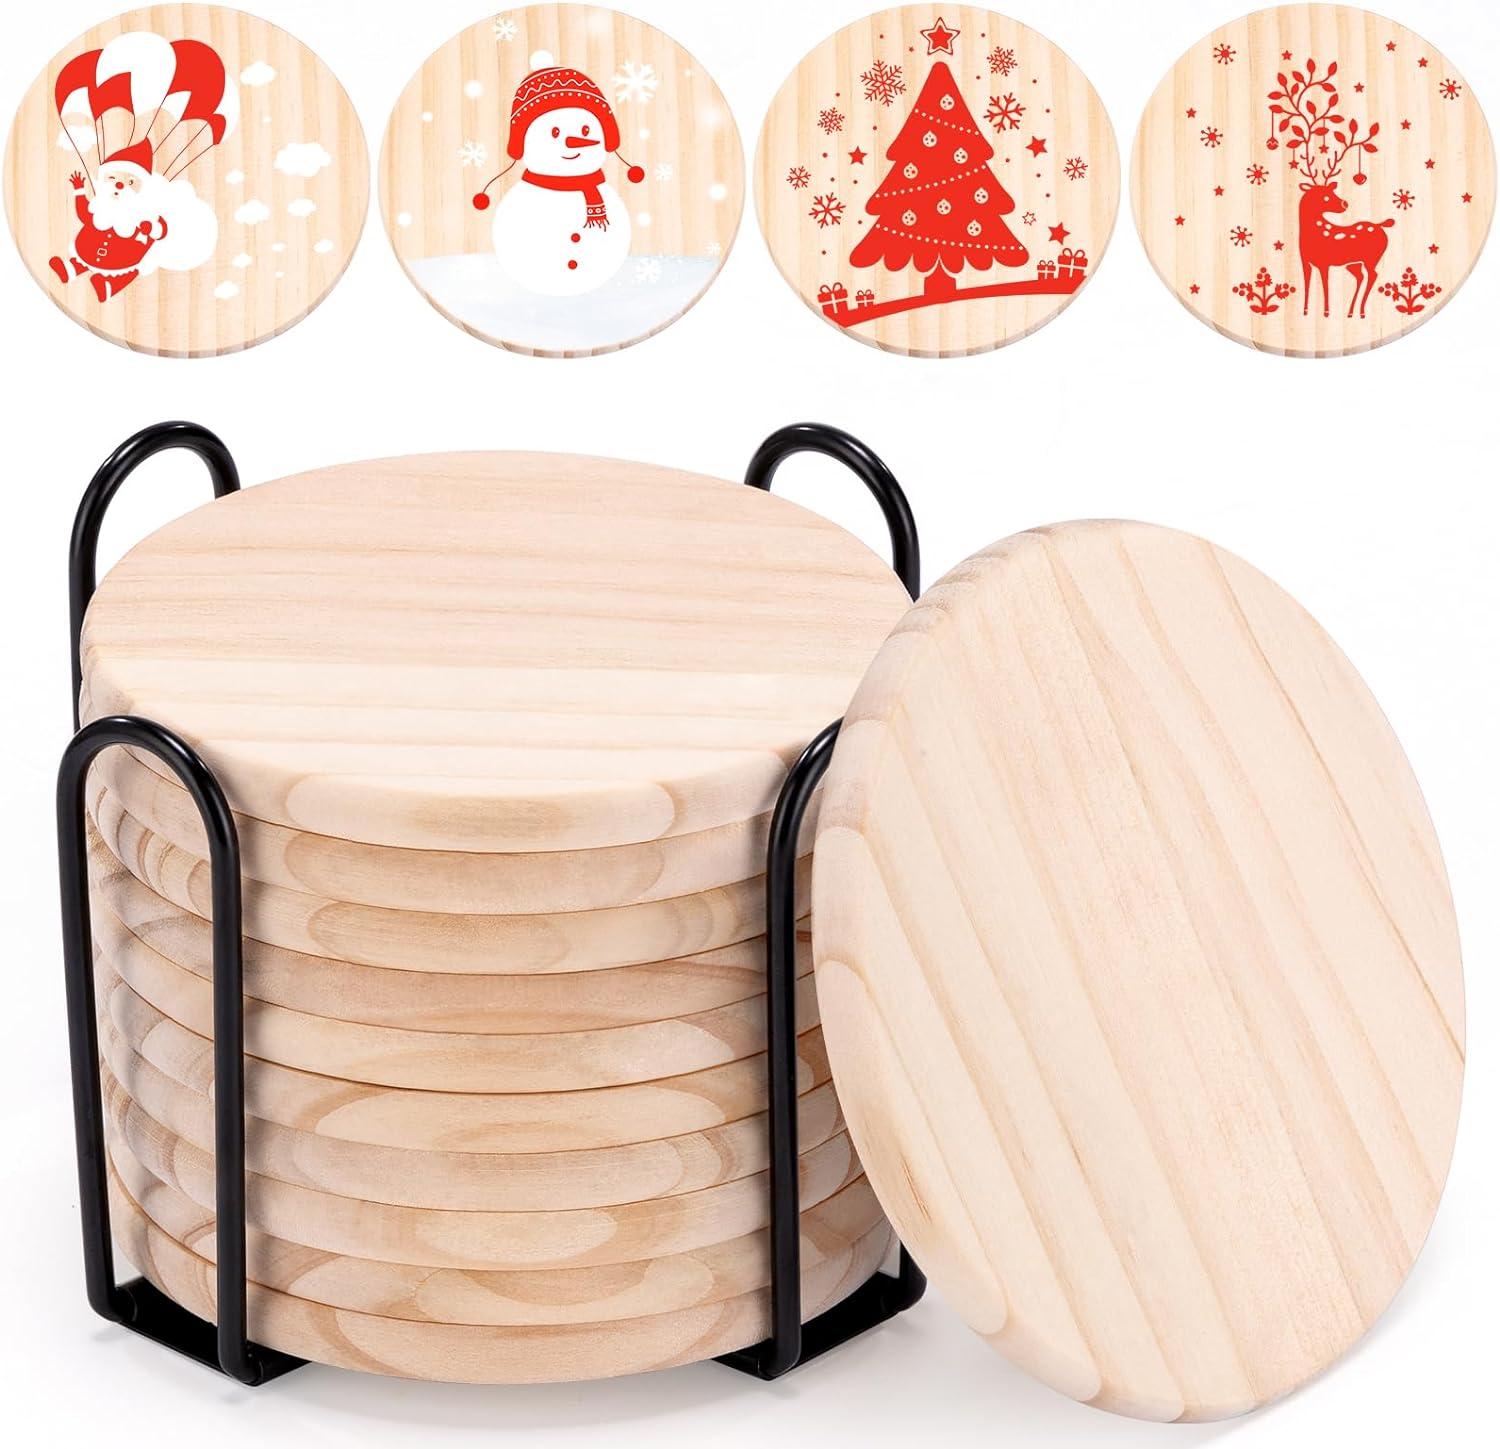 Wood Coasters for Drinks - 8 Pcs Drink Coasters with Holder for Crafts,  Blank Wooden Coasters for Painting, DIY Coasters,Wood Craft Supplies Home